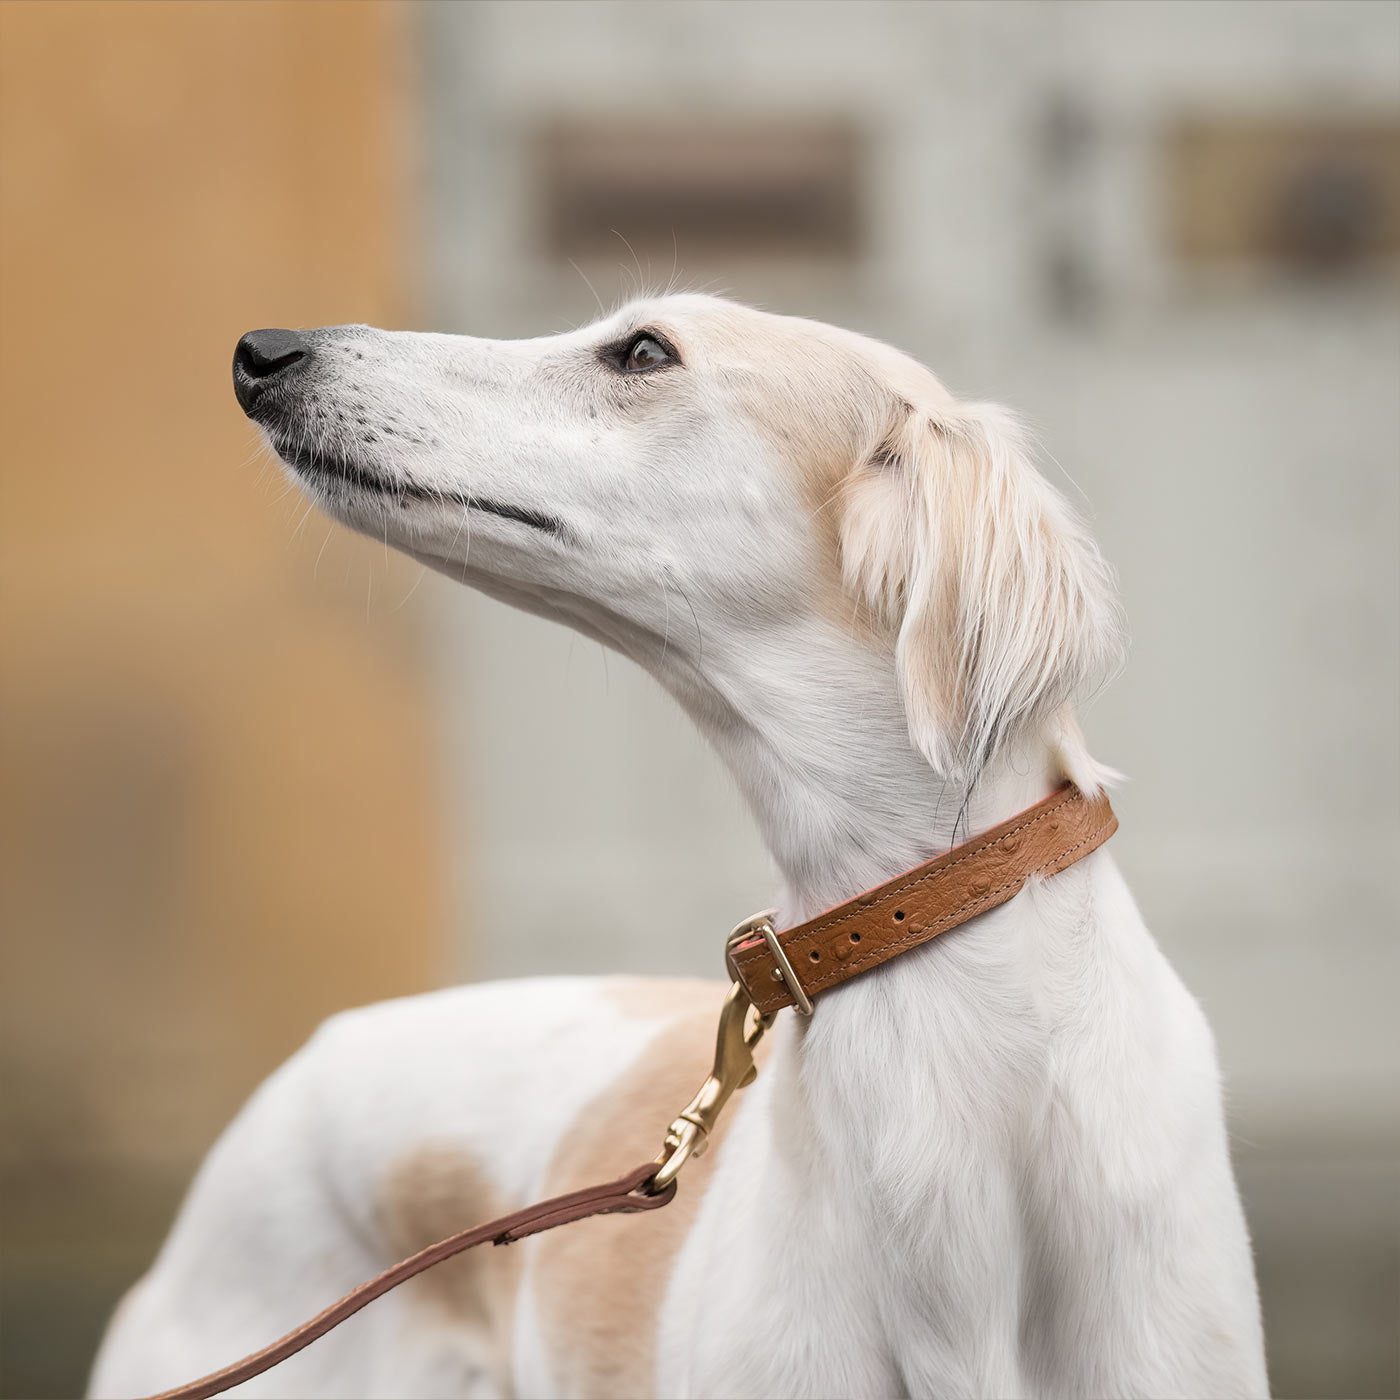 Discover dog walking luxury with our handcrafted Italian Ostrich leather dog Leash in Tan & Orange! The perfect Leash for dogs available now at Lords & Labradors US